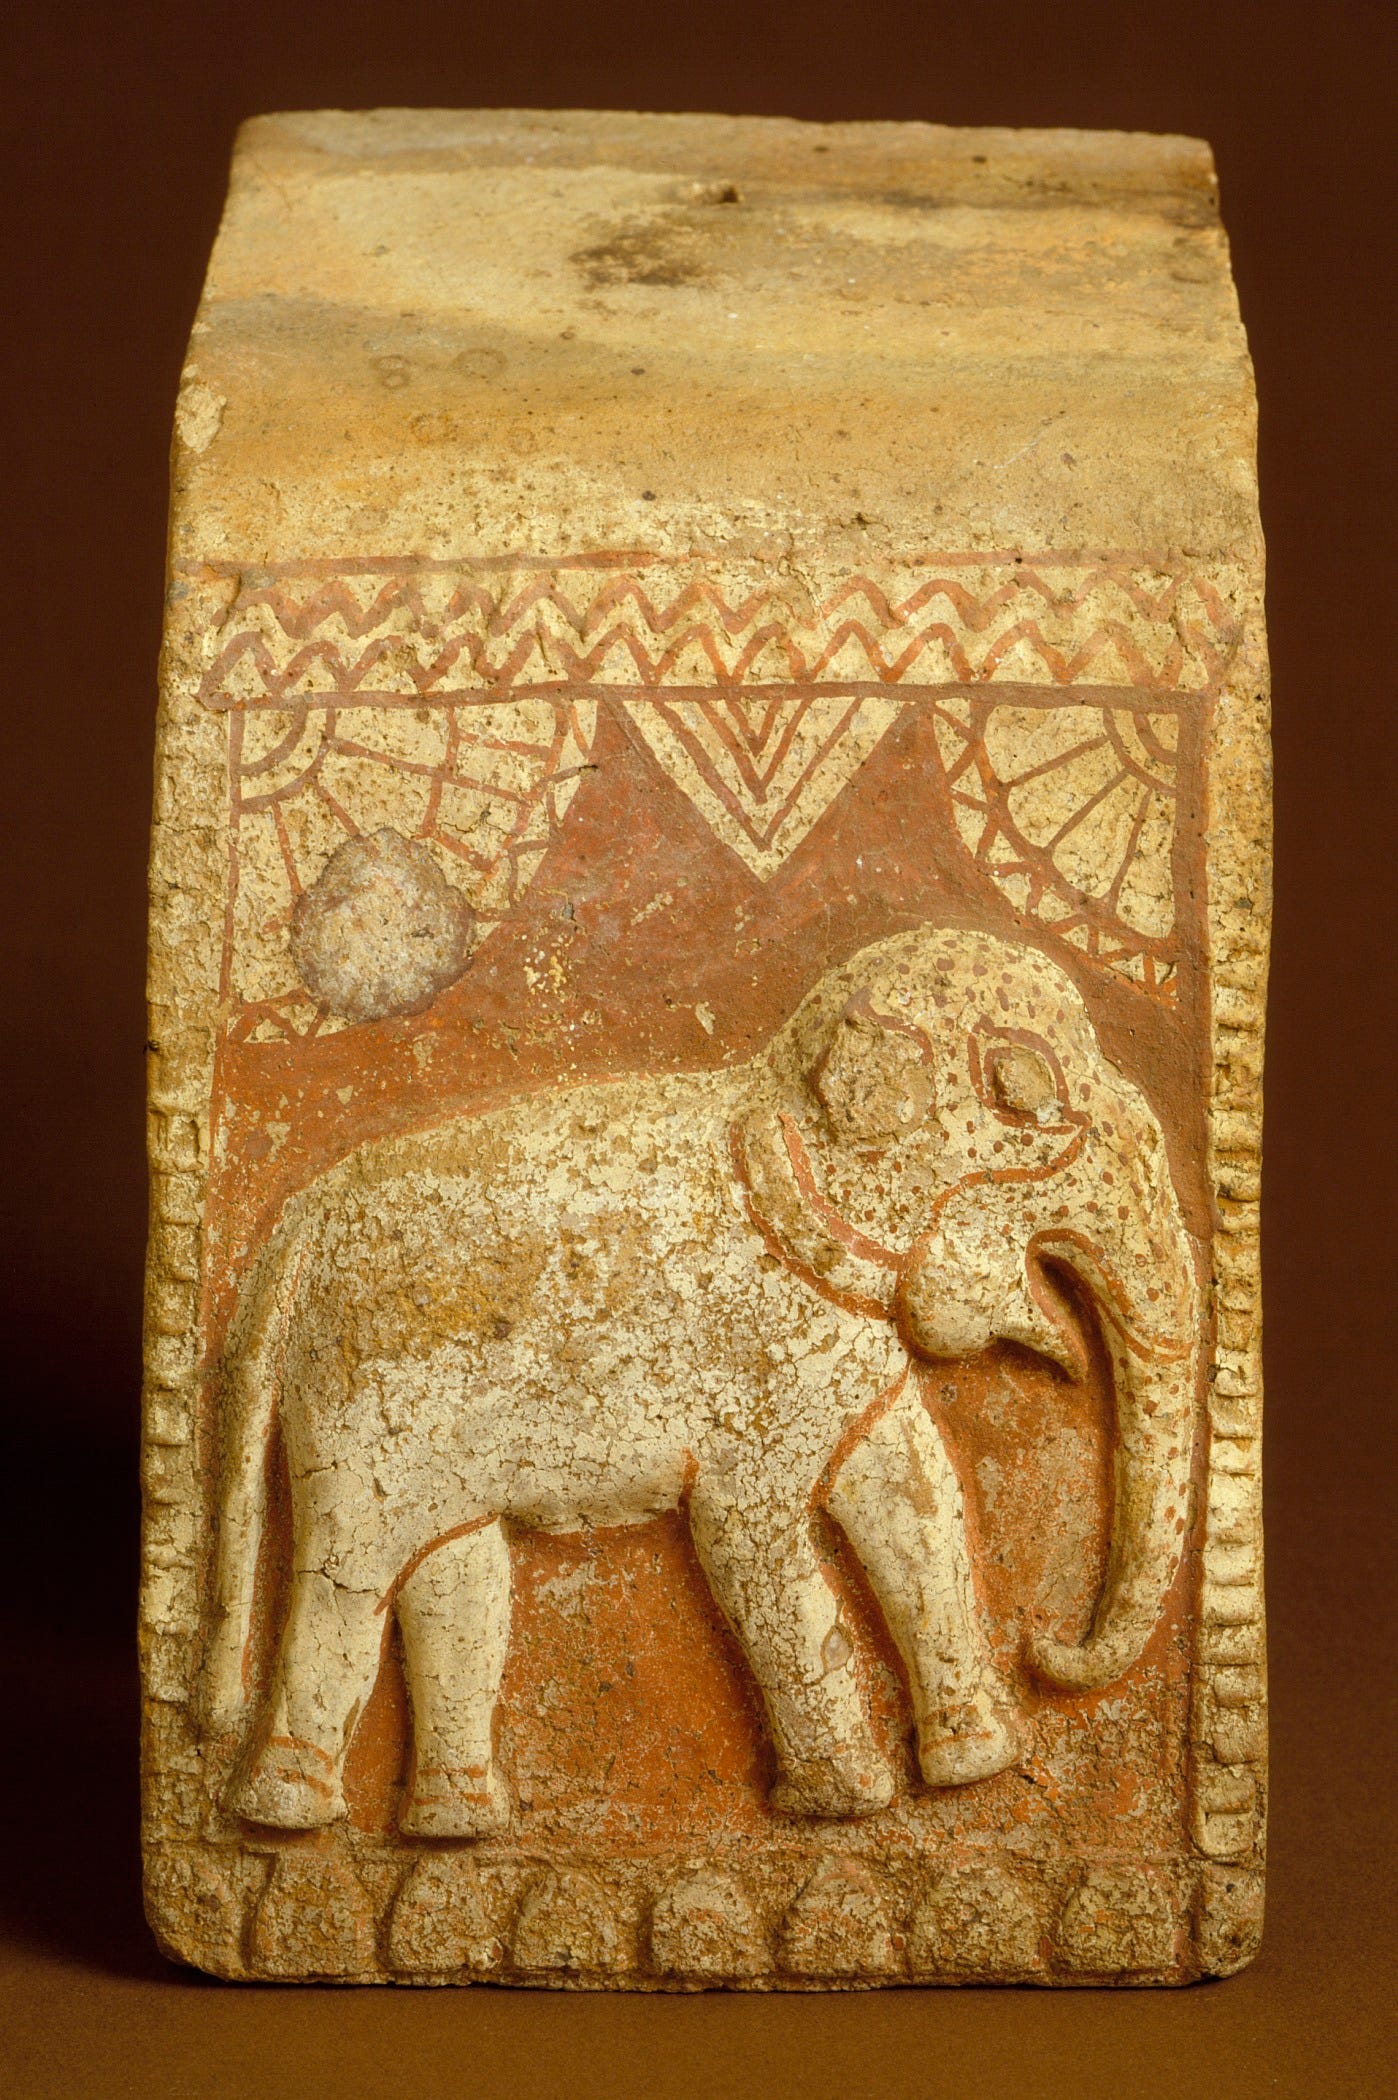 File:Painted Tile with Elephant LACMA M.82.3.jpg - Wikimedia Commons